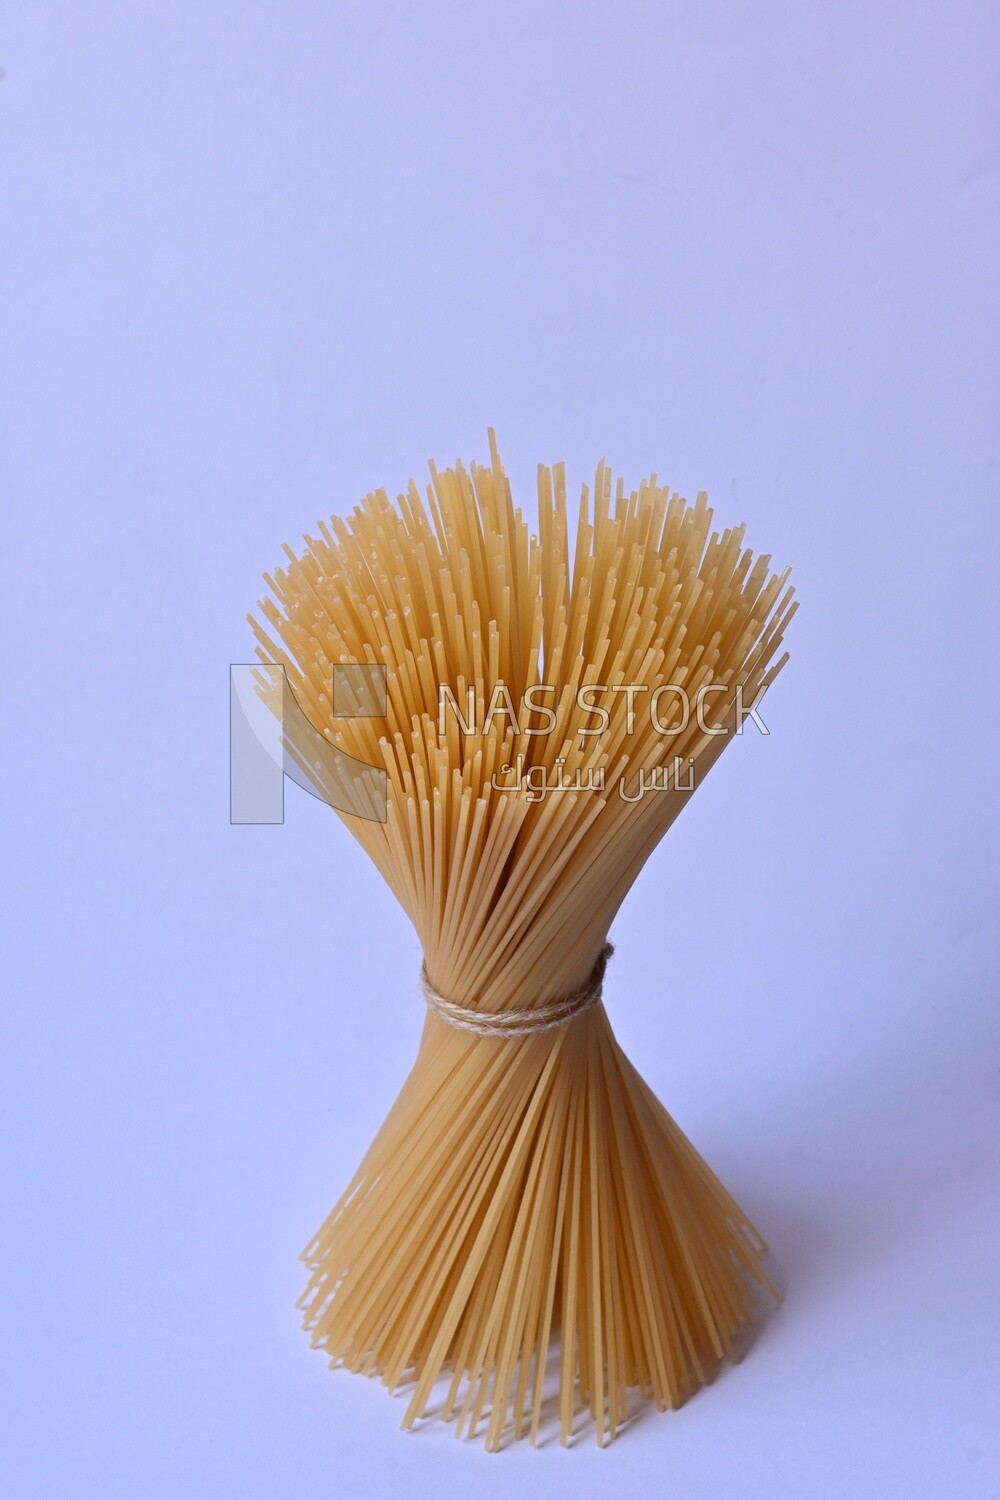 Package of uncooked spaghetti pasta